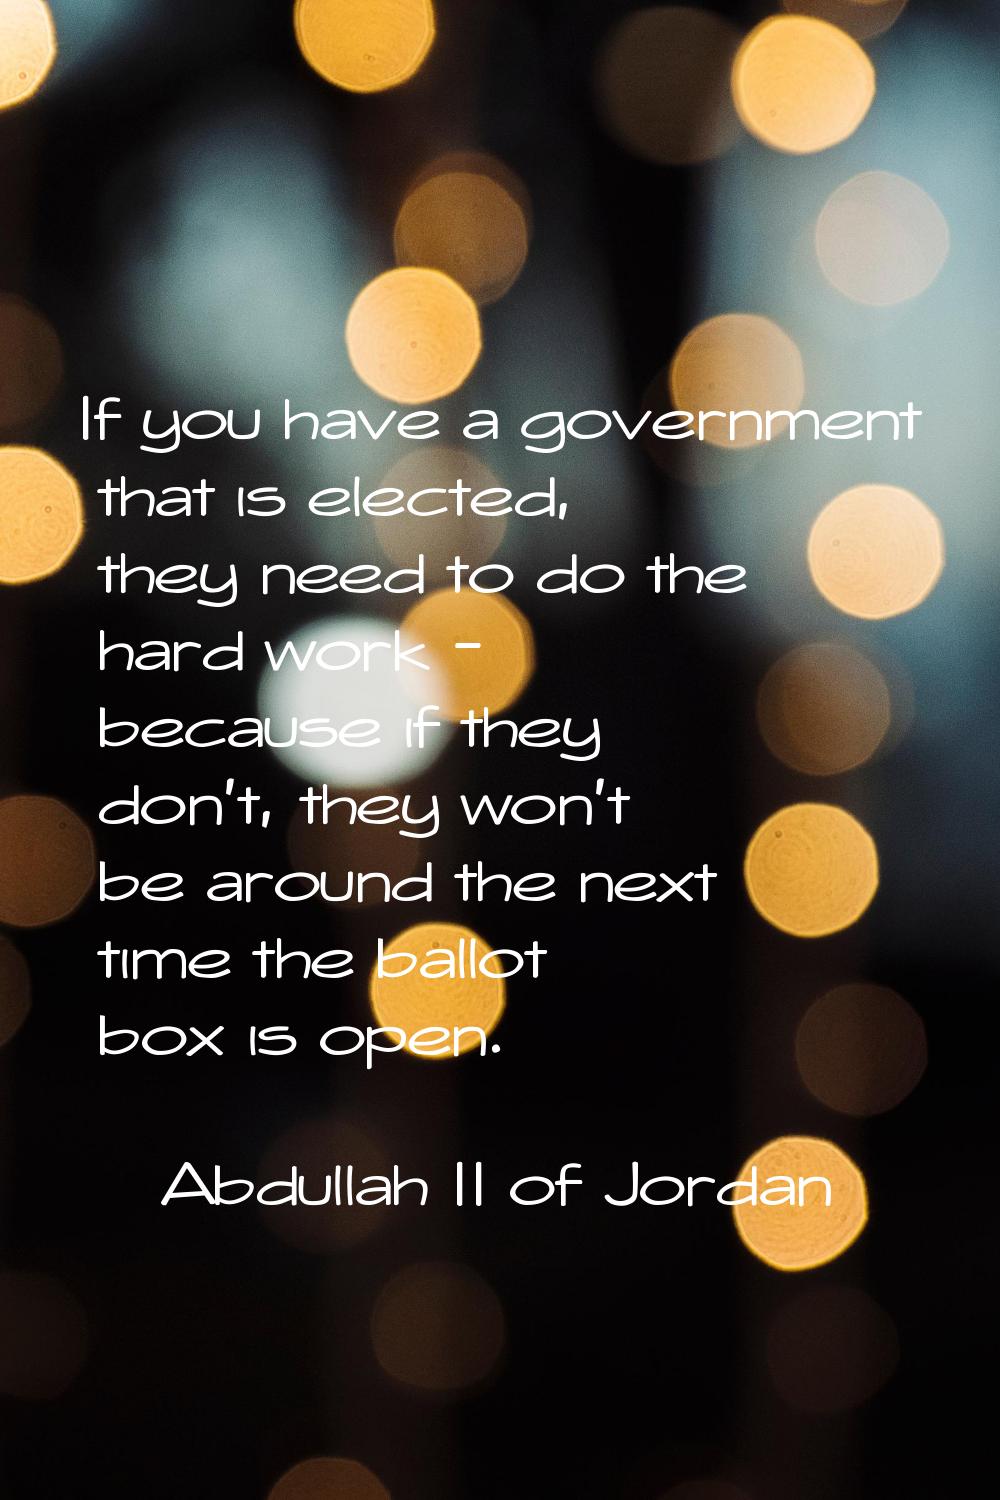 If you have a government that is elected, they need to do the hard work - because if they don't, th